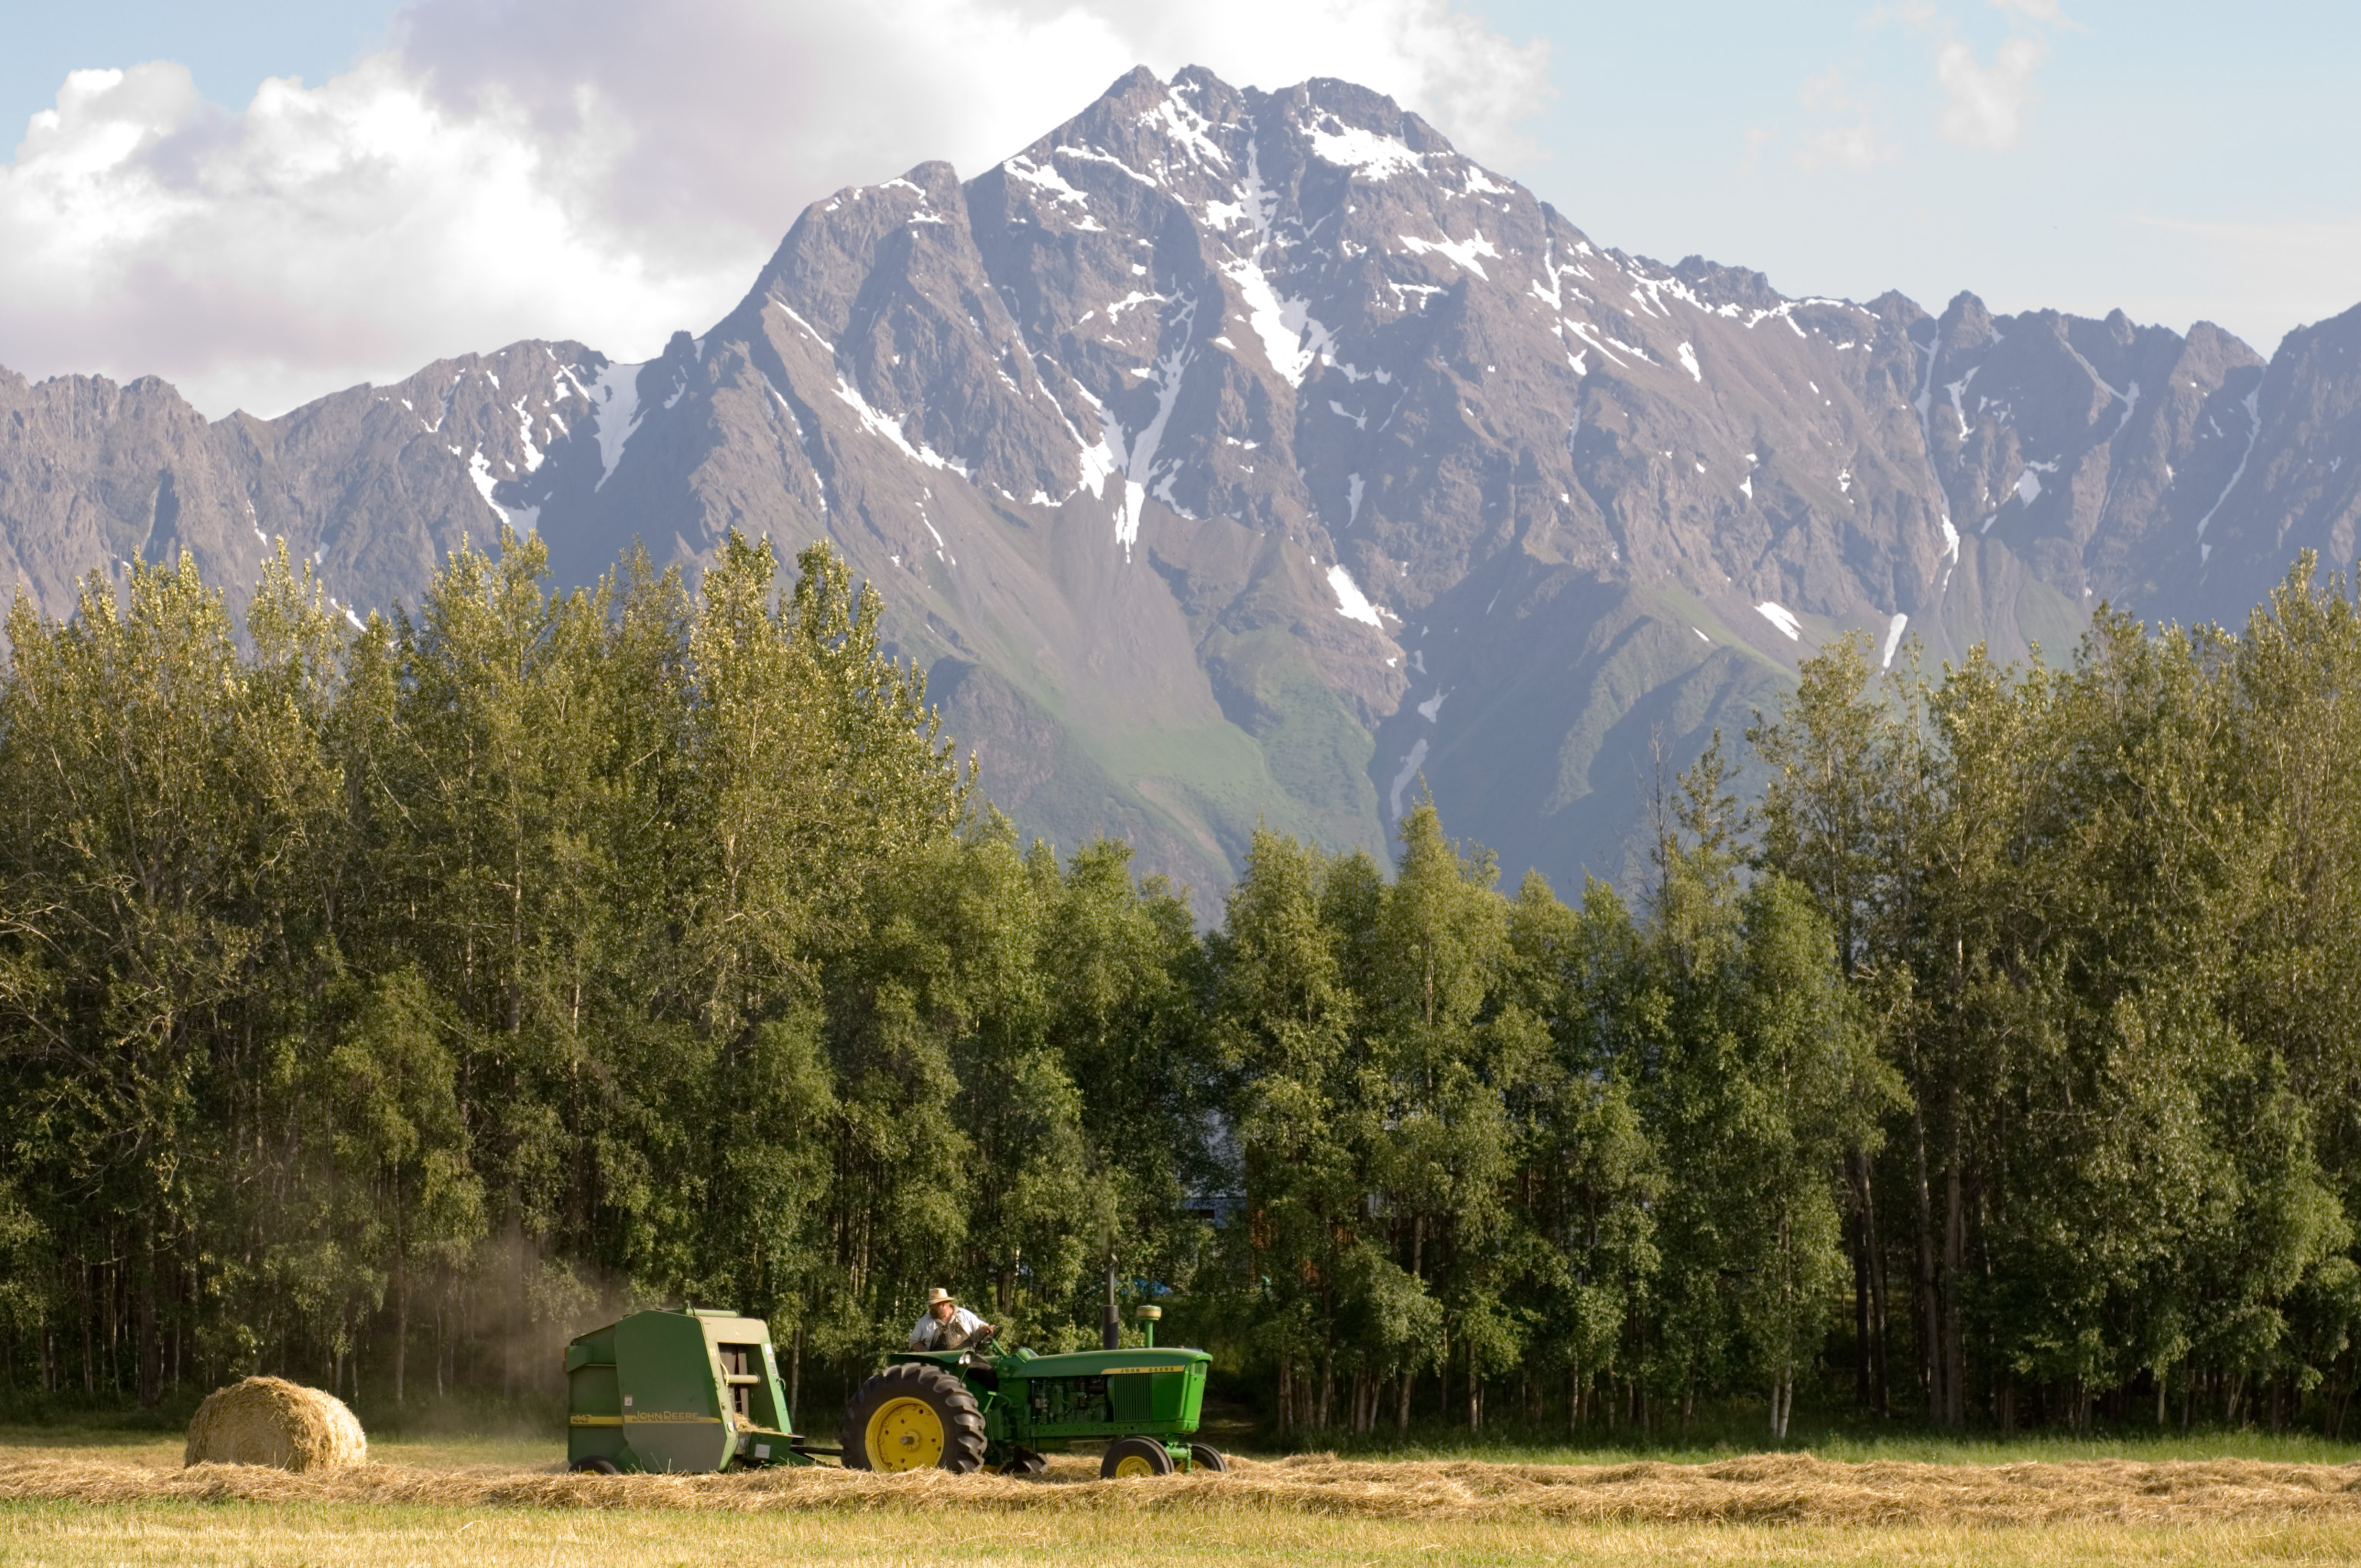 Tractor in front of a mountain